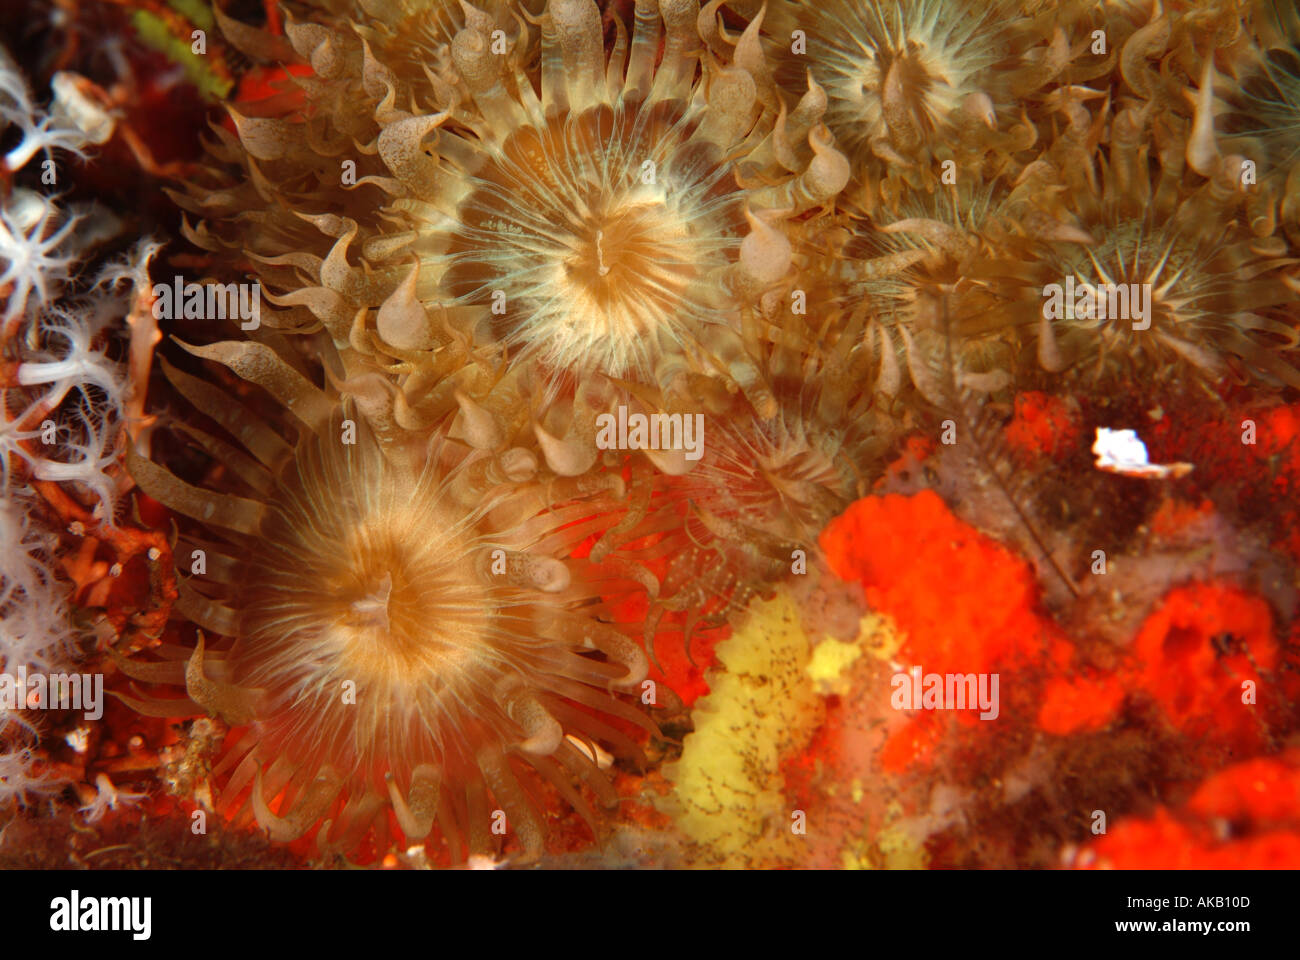 Light bulb anemone in the Gulf of Mexico, off Texas Stock Photo - Alamy